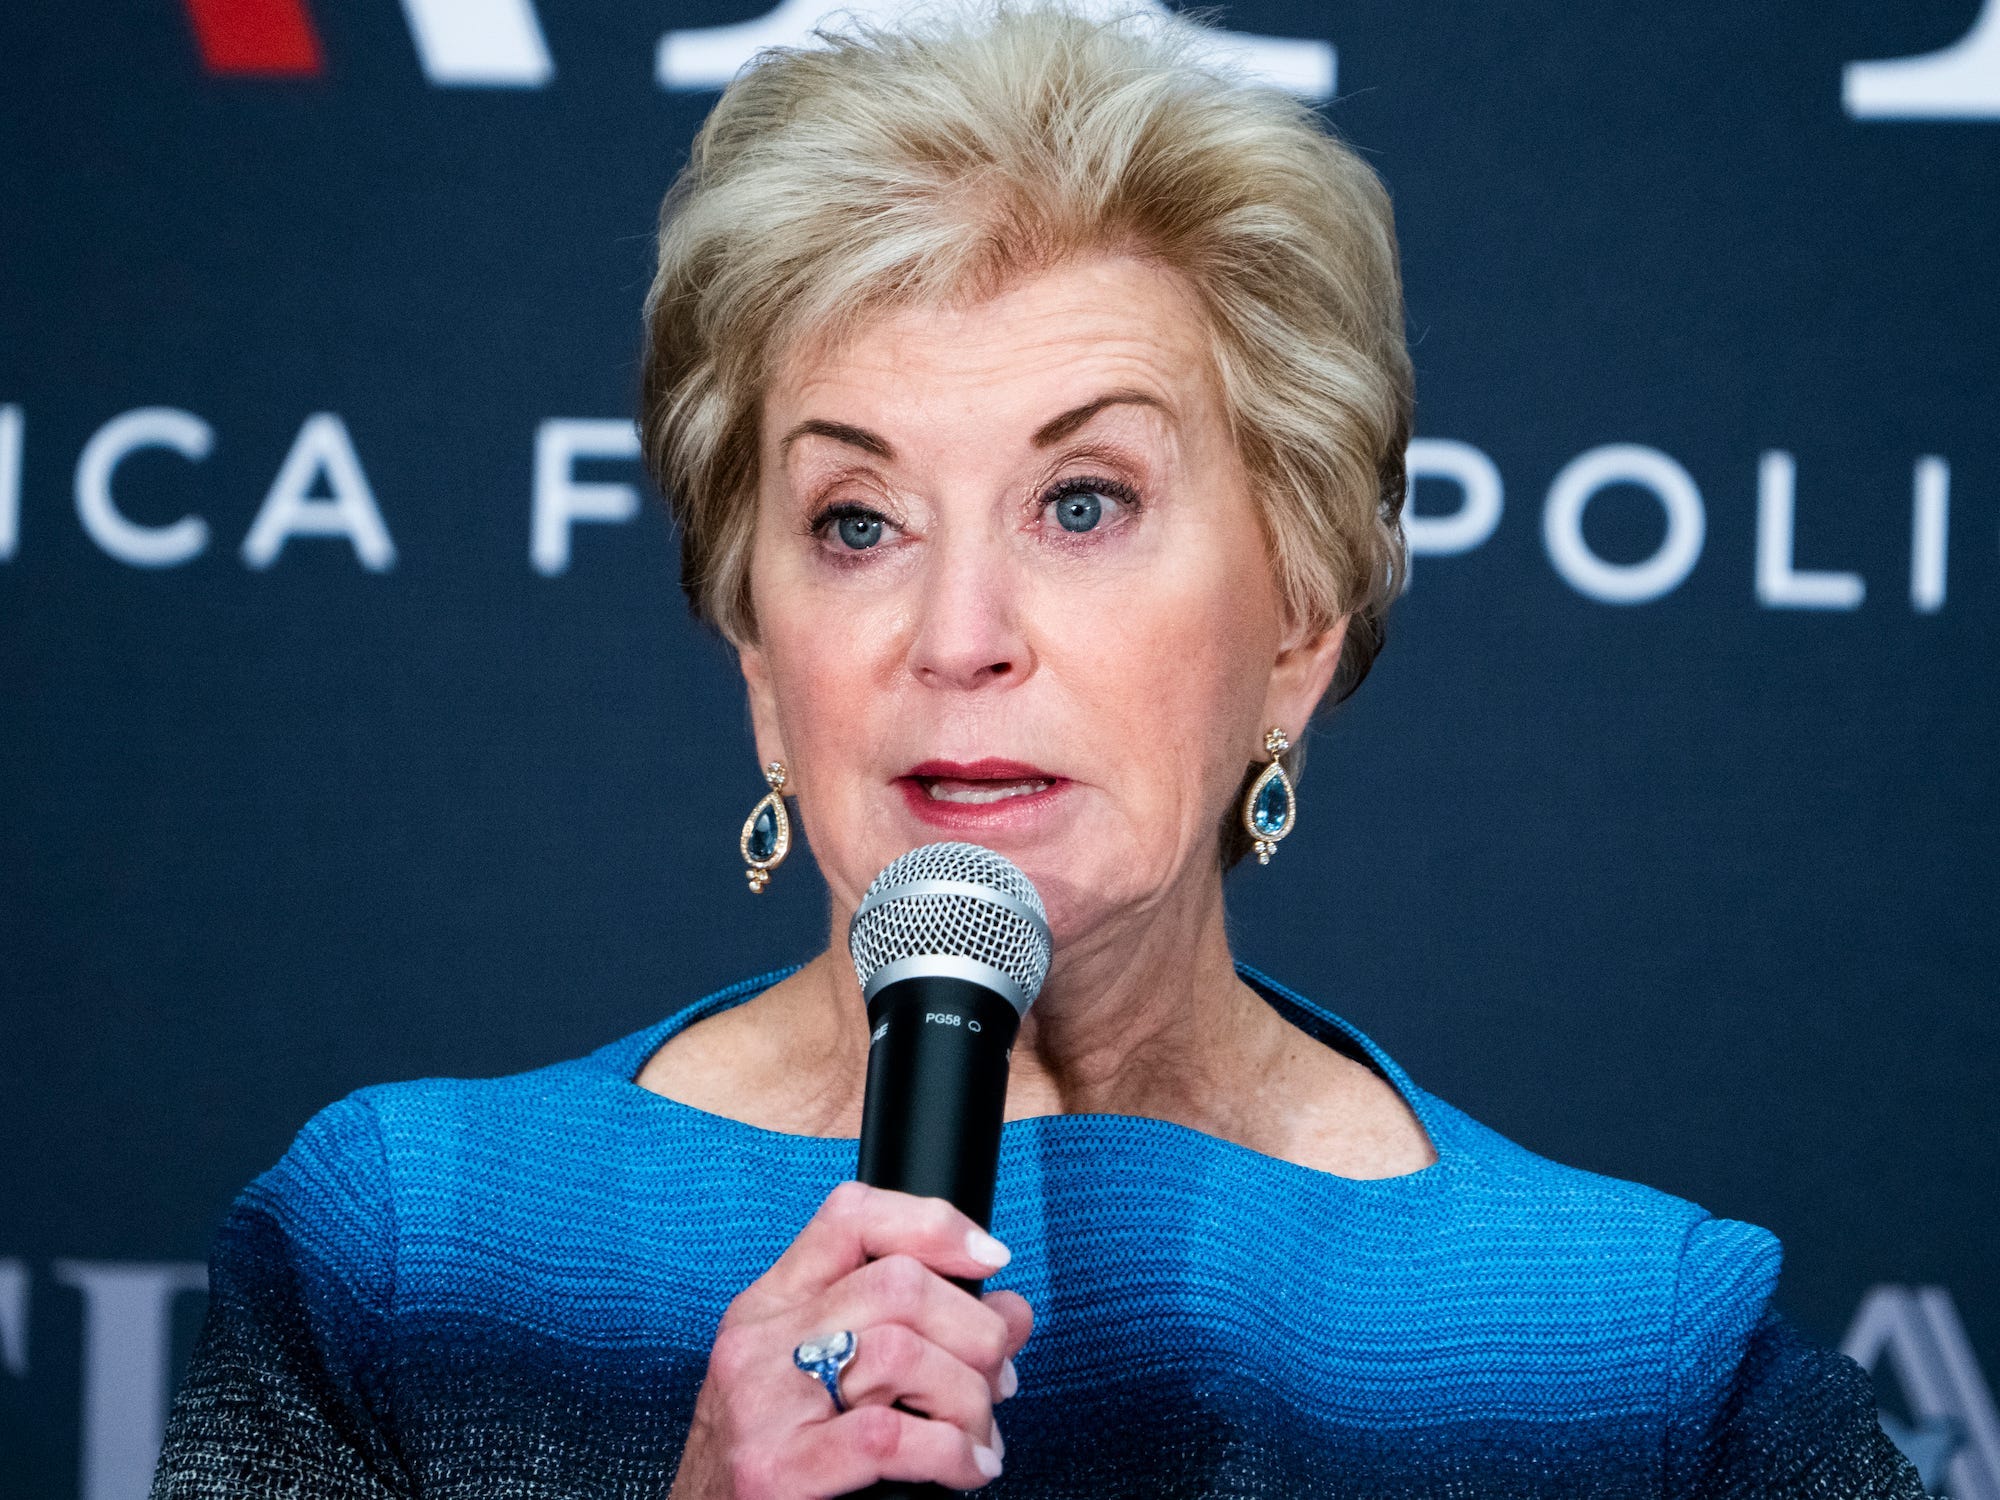 <p>Linda McMahon, who founded World Wrestling Entertainment with <a href="https://www.businessinsider.com/wwe-billionaire-vincent-mcmahon-lost-billions-coronavirus-2020-10">her husband Vince</a>, has given $10 million to the Trump-aligned MAGA Inc. super PAC, along with $814,600 to the Trump 47 Committee.</p><p>McMahon served as the head of the Small Business Administration from 2017-2019 under Trump.</p><p>She's also the chair of the board of the America First Policy Institute, a Trump-aligned think tank.</p>